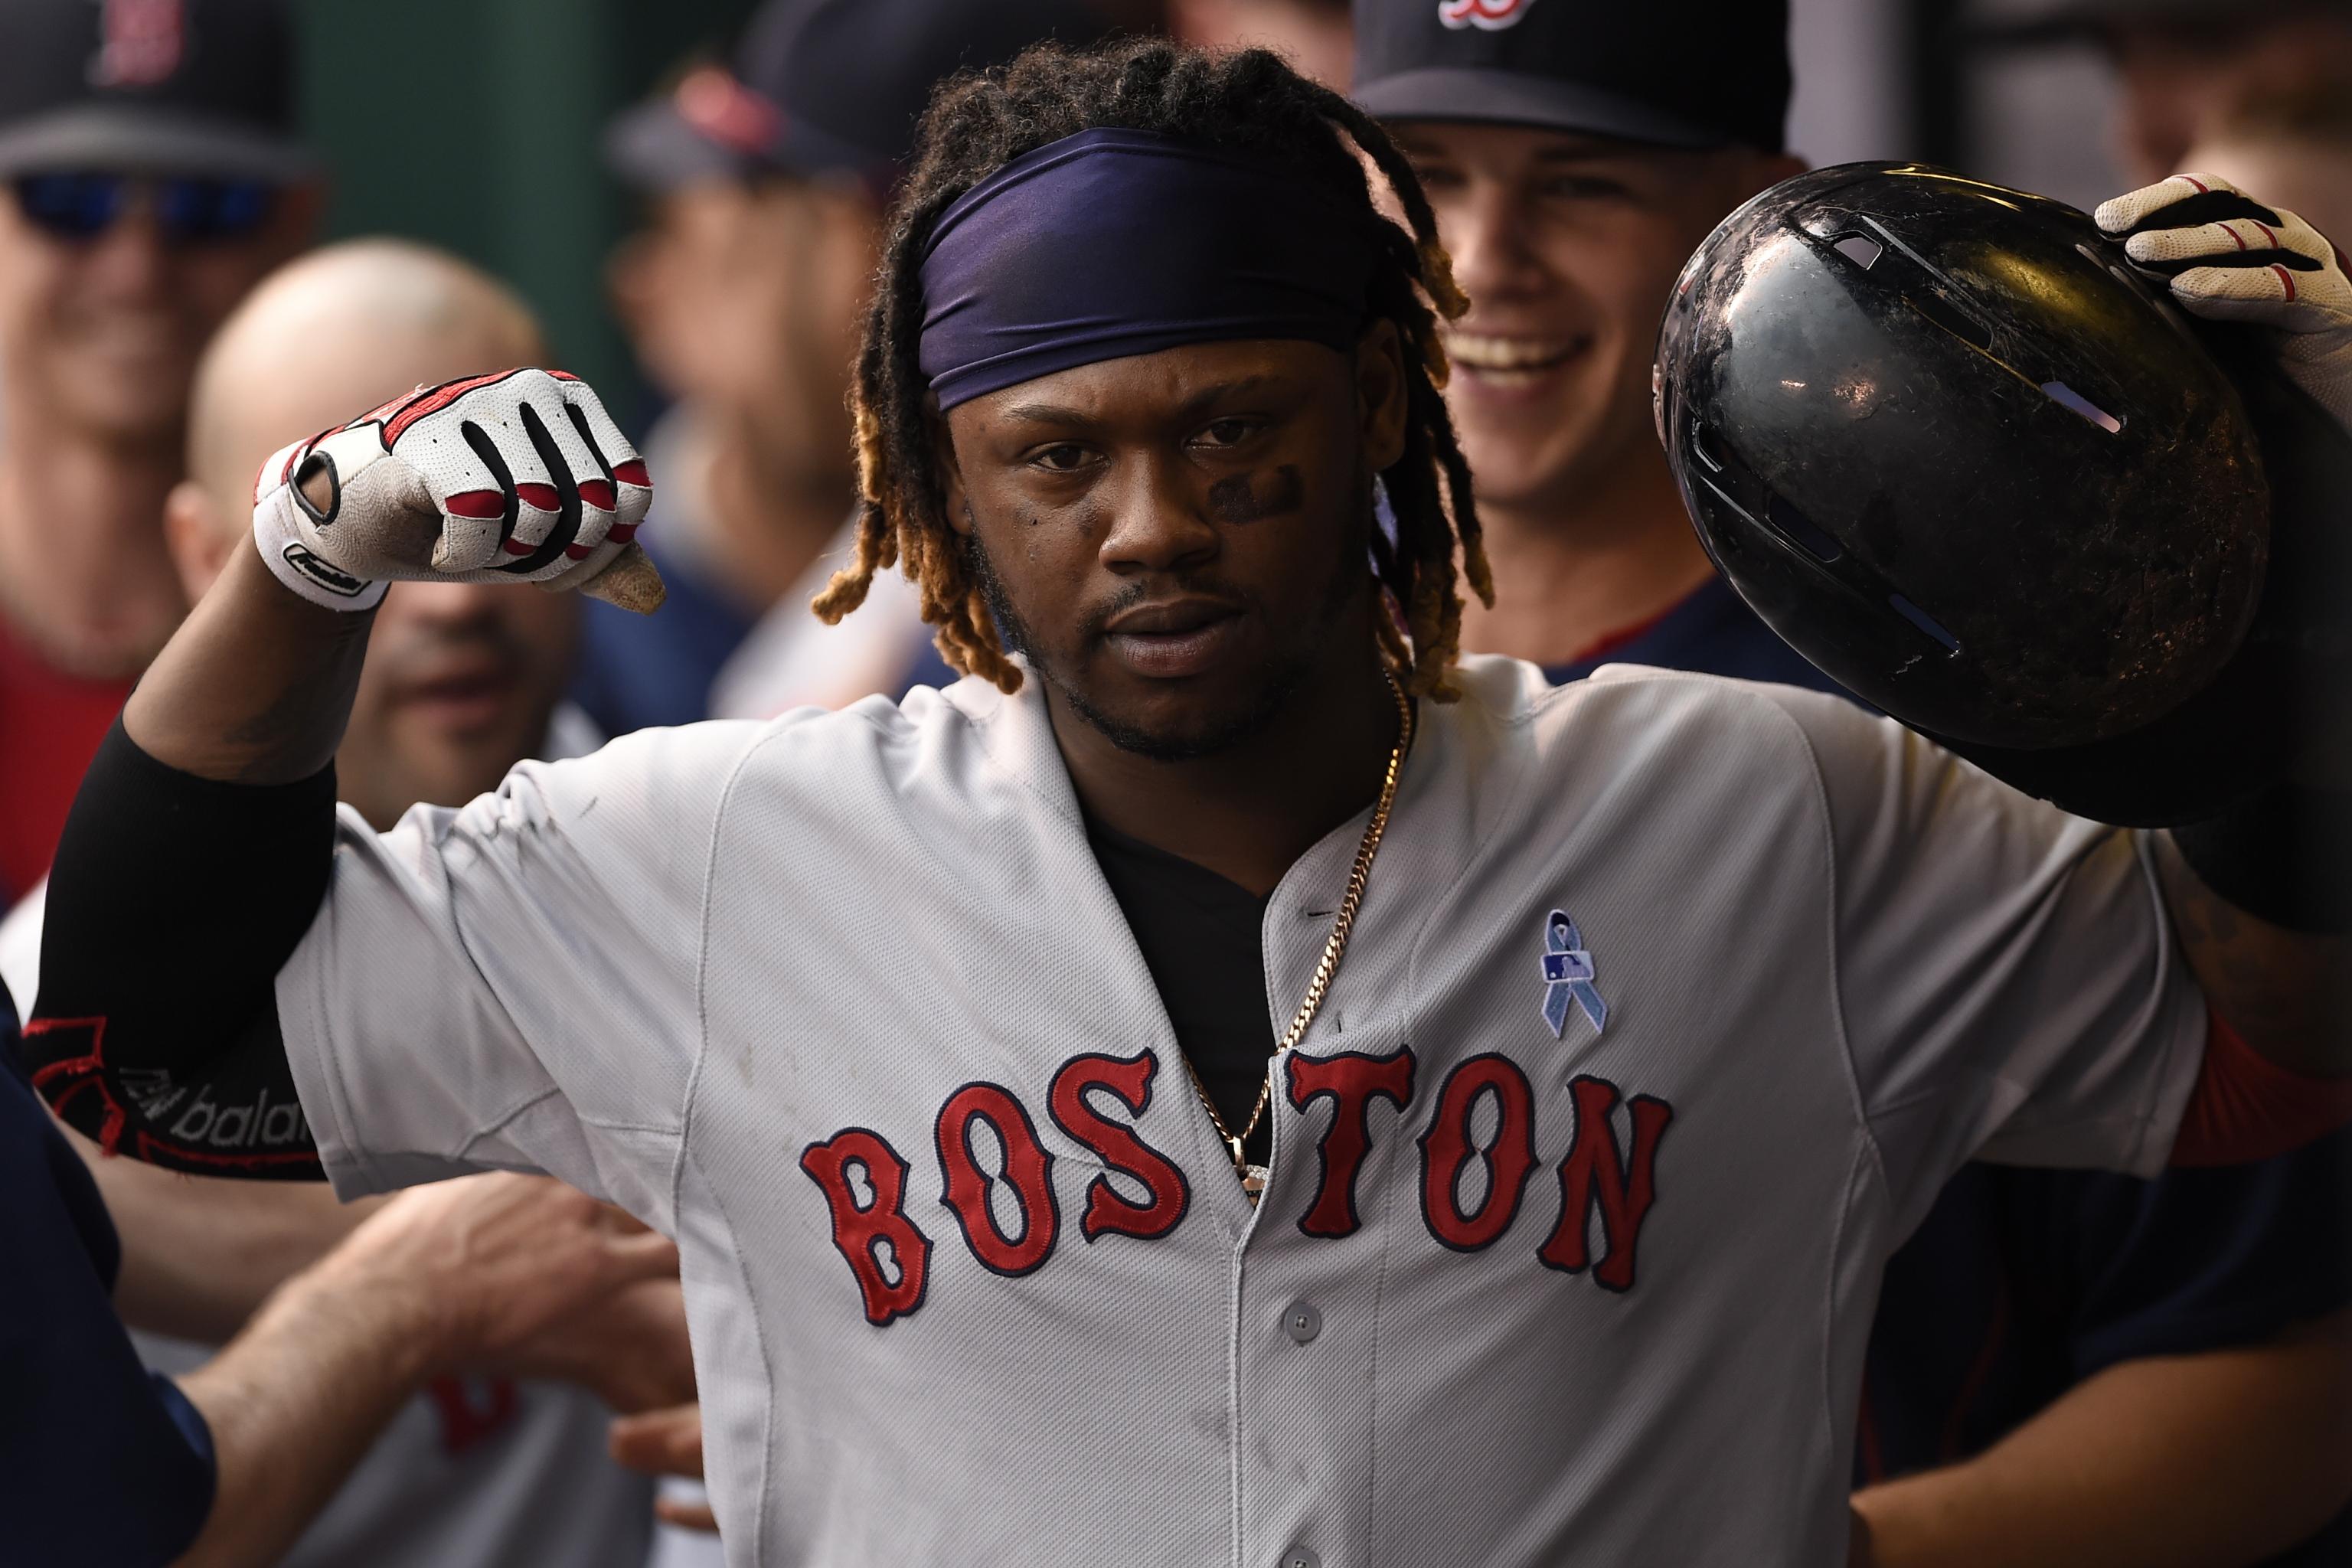 Boston Red Sox - HANLEY RAMIREZ PRESS CONFERENCE November 25, 2014, Boston,  MA: Newly acquired Boston Red Sox left fielder Hanley Ramirez speaks during  a press conference announcing a four-year contract at